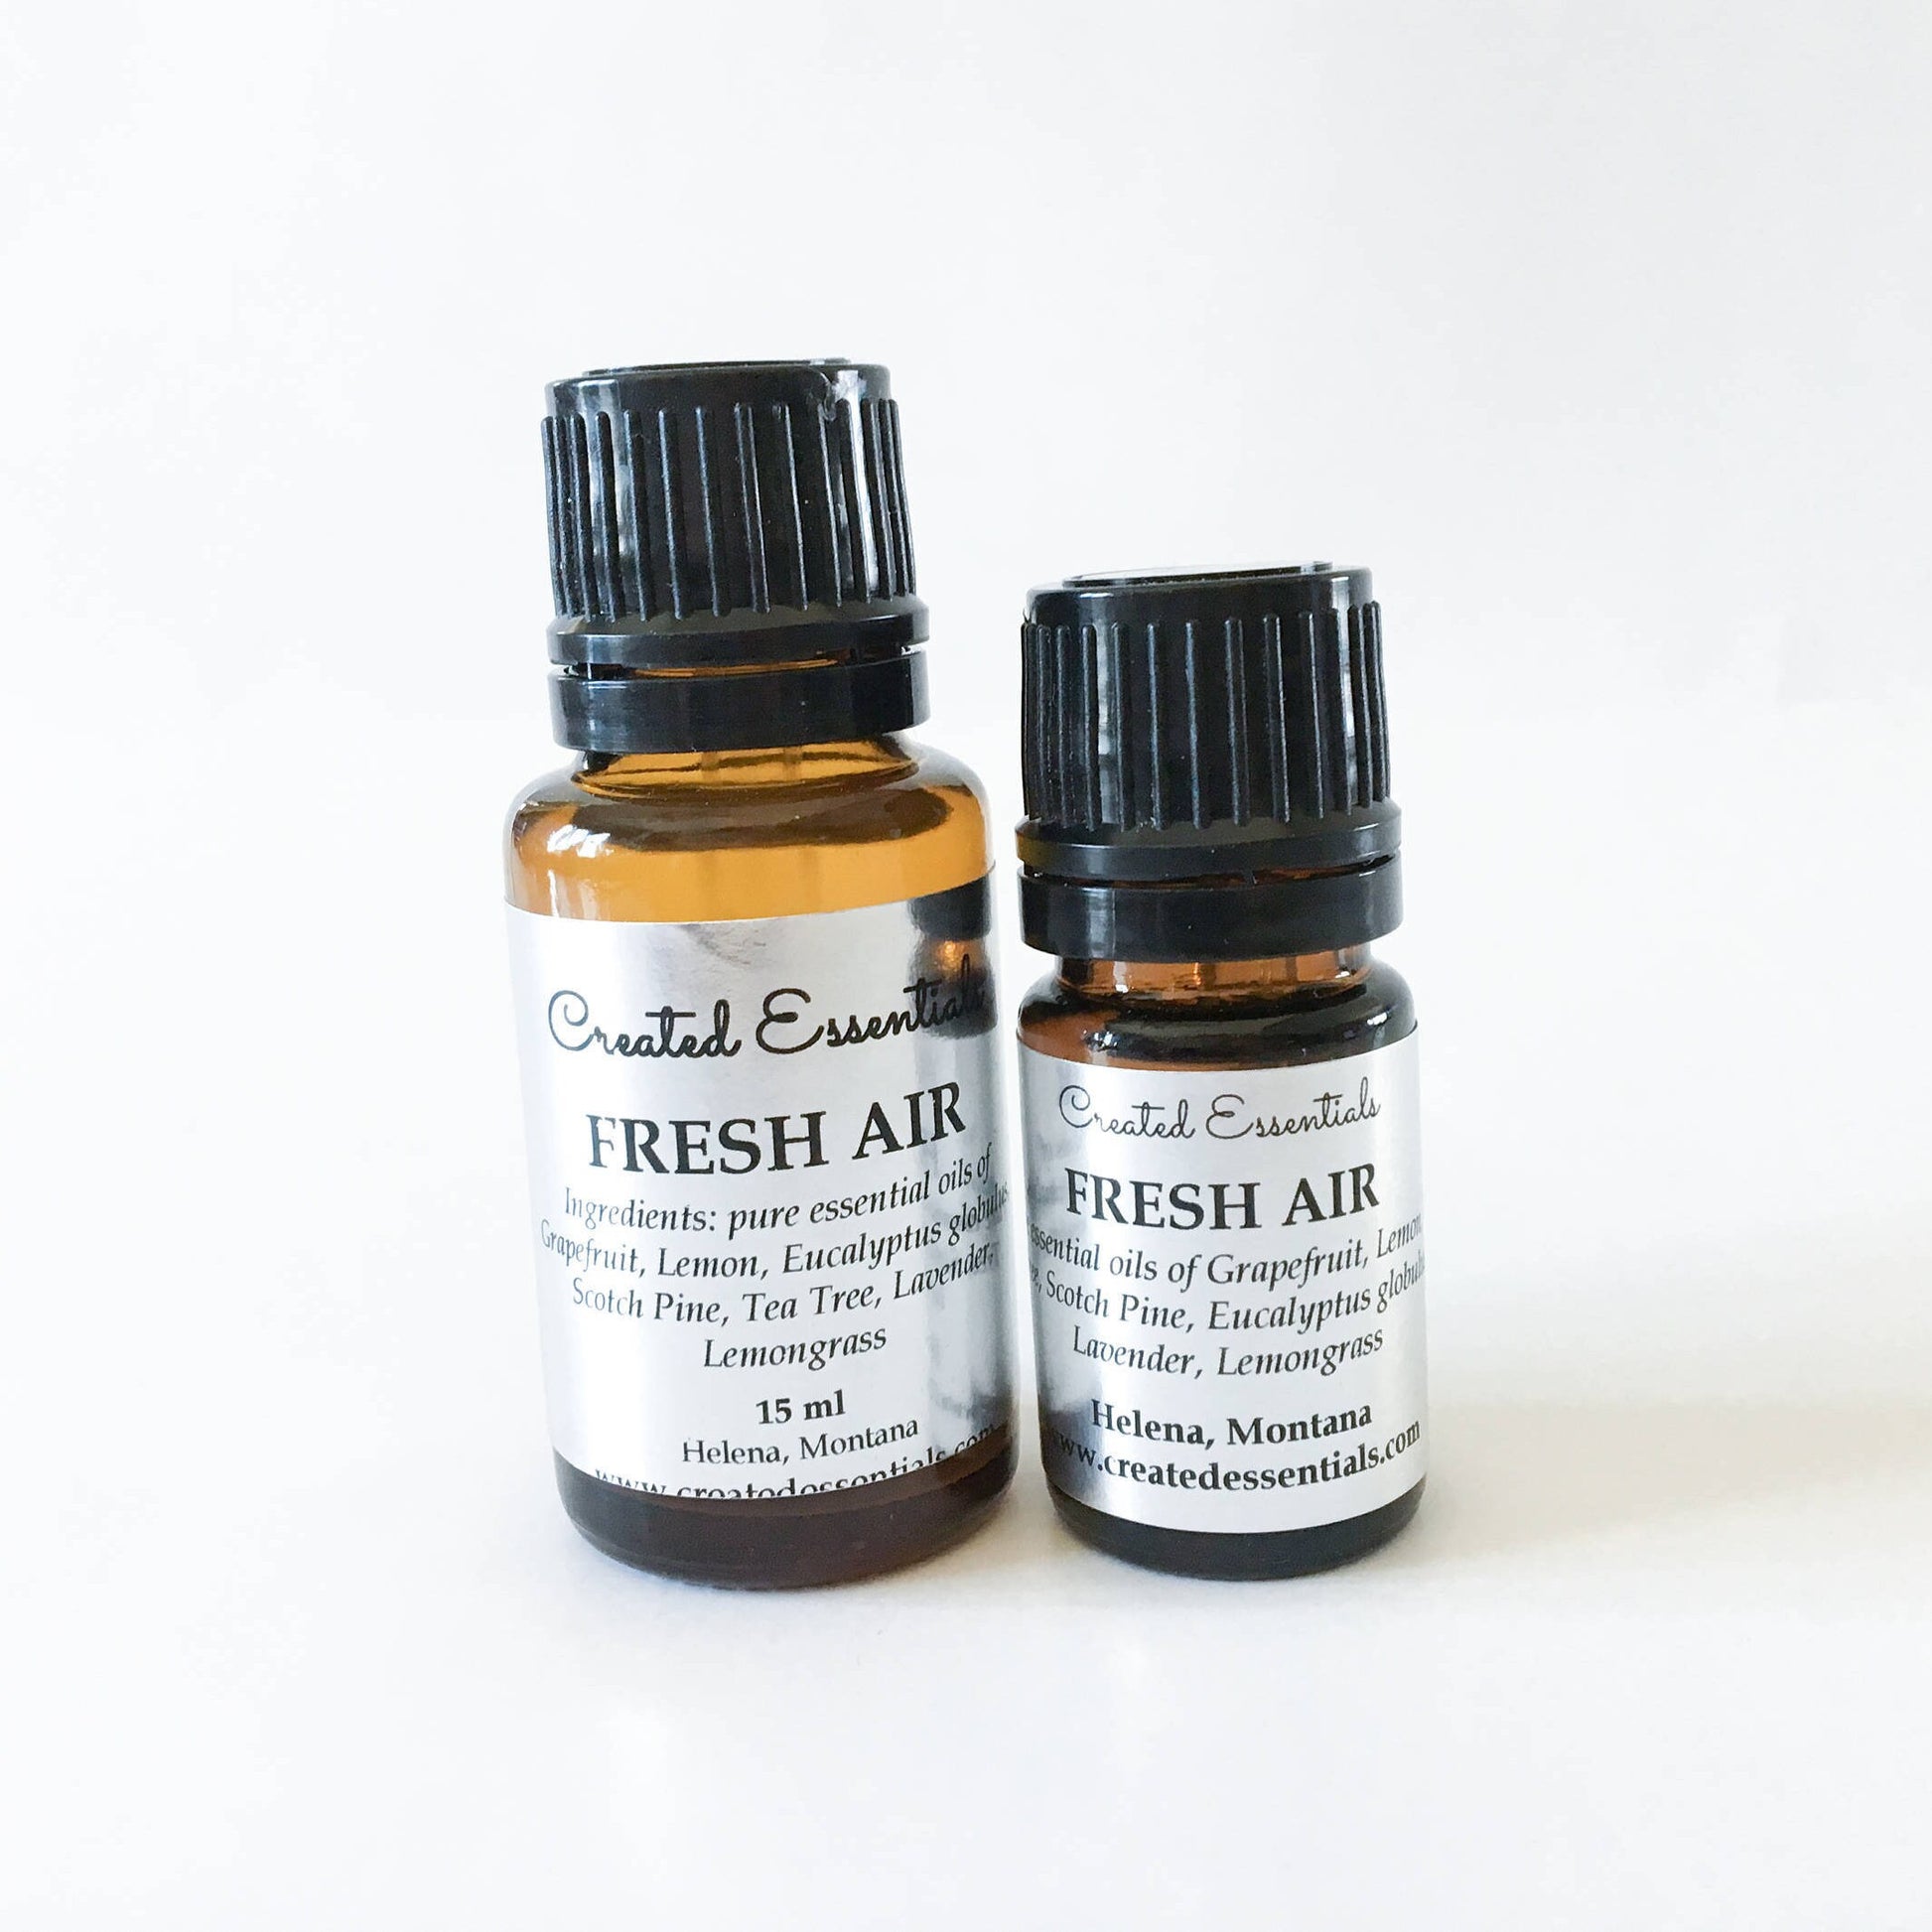 Fresh Air Pure Essential Oil Blend | Essential Oil Blend for Purification and Cleansing | Therapeutic Fresh Air Diffuser Blend